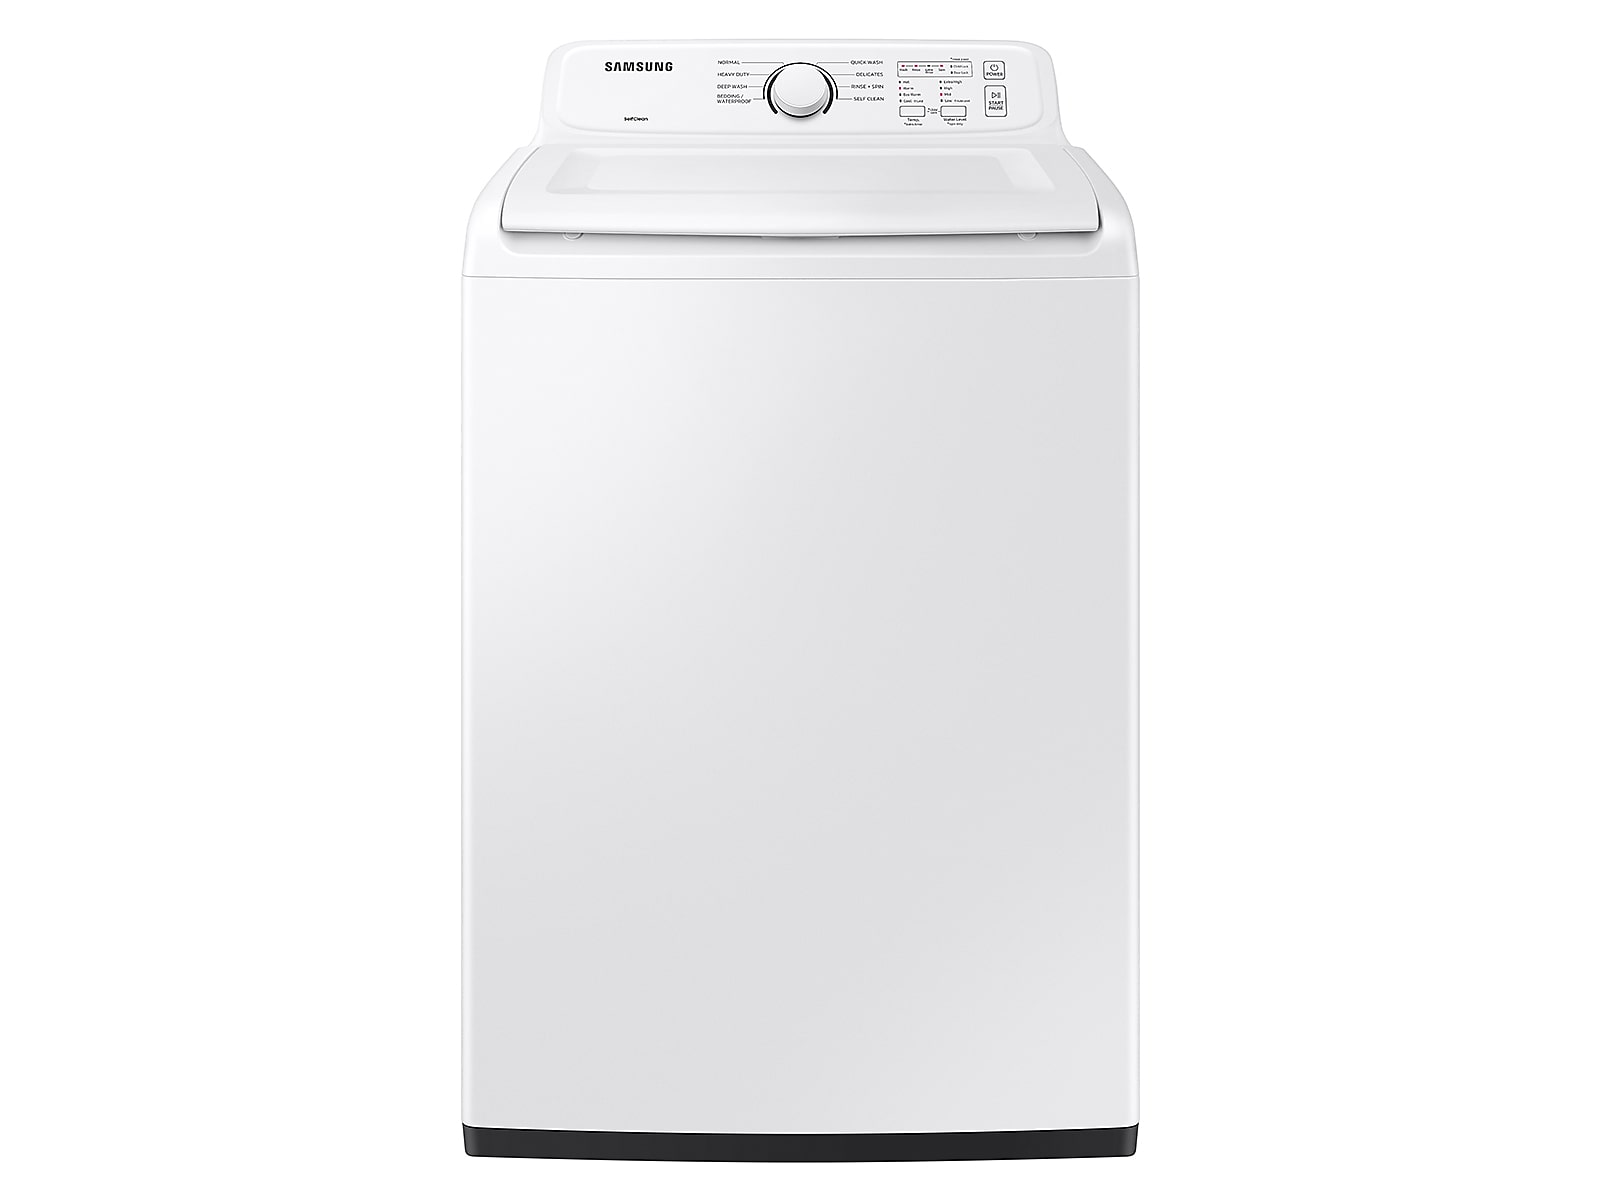 Samsung 4.1 cu. ft. Capacity Top Load Washer with Soft-Close Lid and 8 Washing Cycles in White(WA41A3000AW/A4)